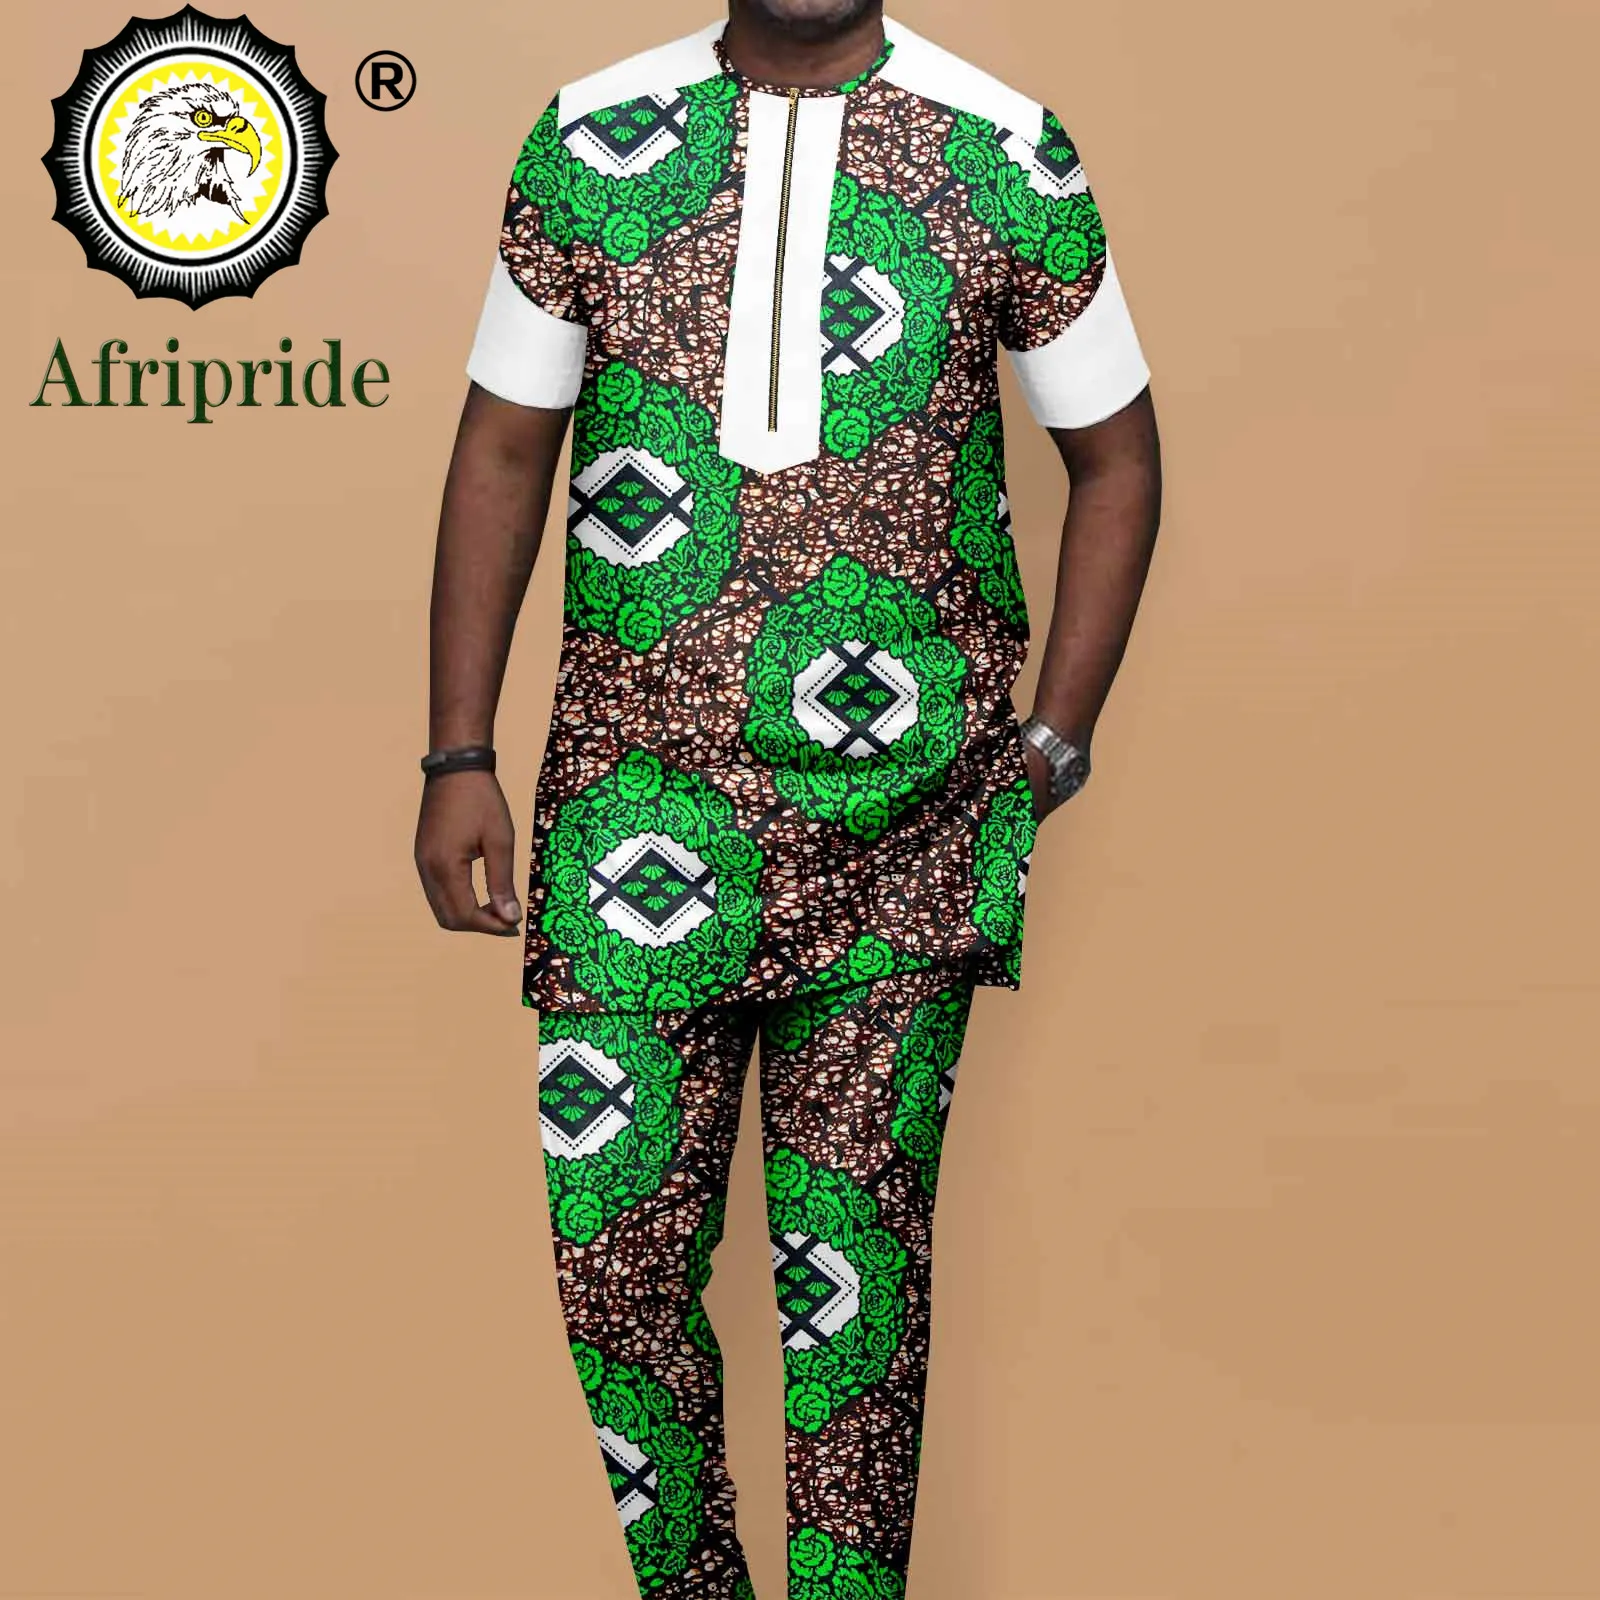 African Tracksuit for Men Dashiki Print Shirts and Ankara Pants Tracksuit Tribal Outwear Plus Size Casual Clothes A2216031 african clothes for men zip shirts and ankara pants 2 piece set dashiki outfits tribal tracksuit bazin riche outfits a2216073